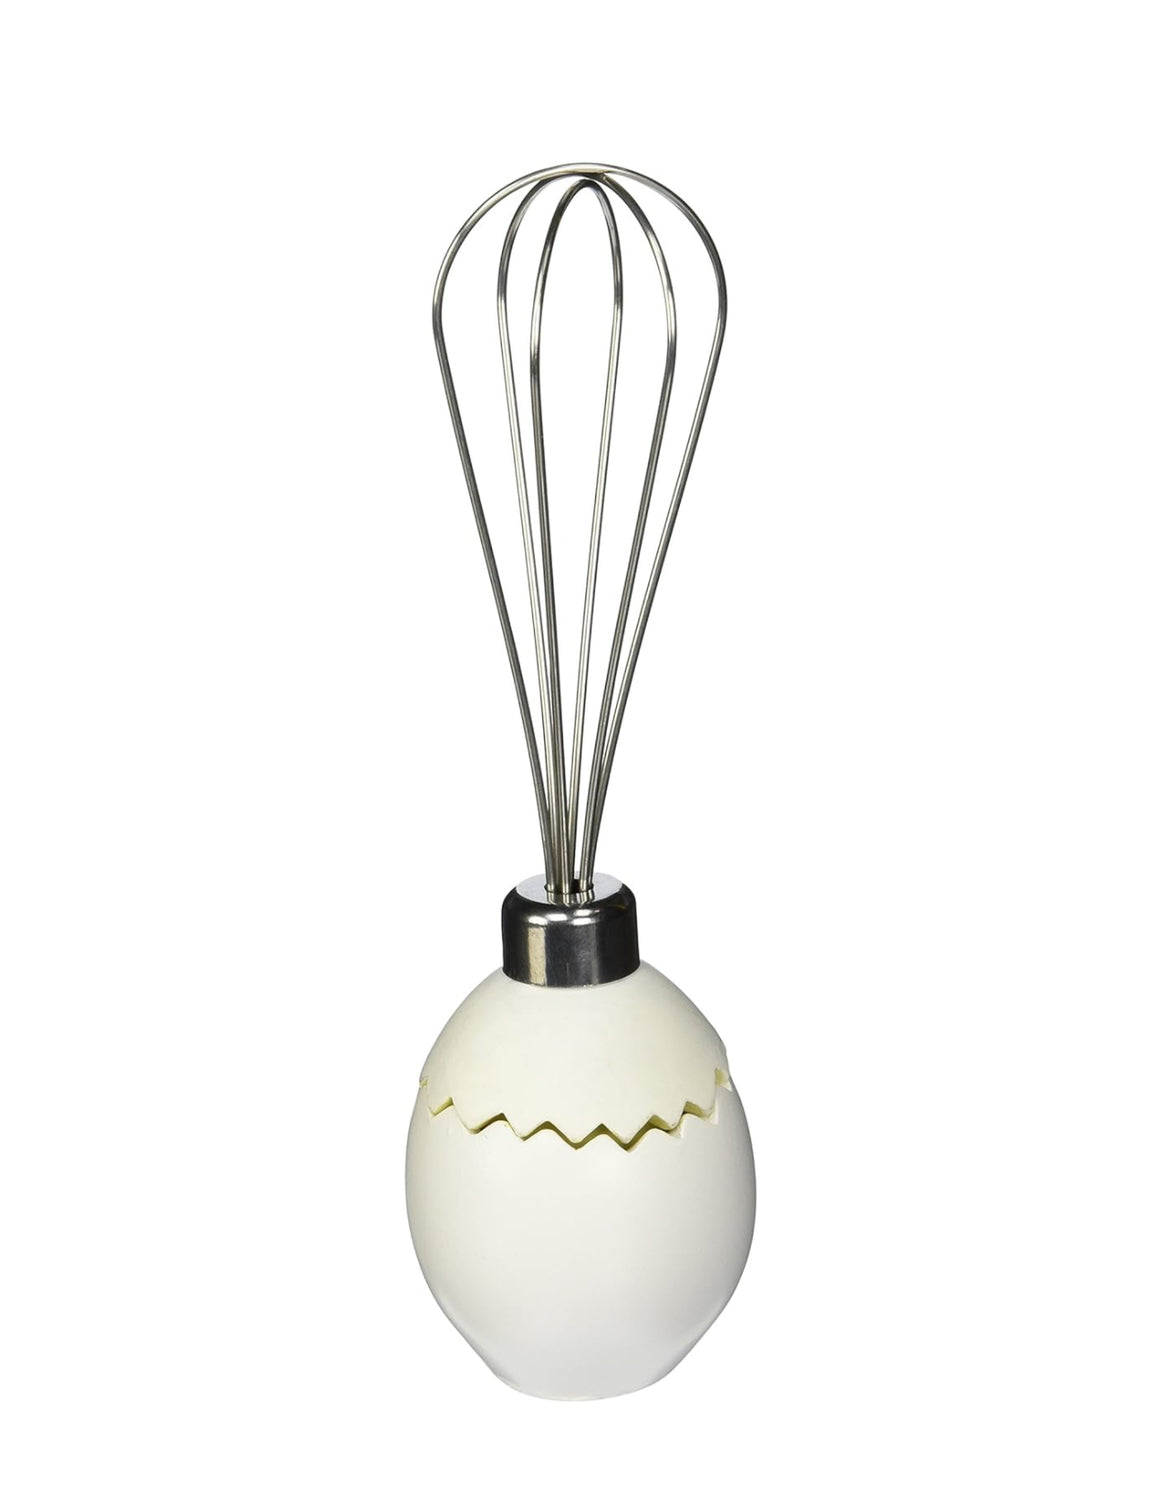 K. Chanel White and Yellow Stainless-Steel Egg Whisk